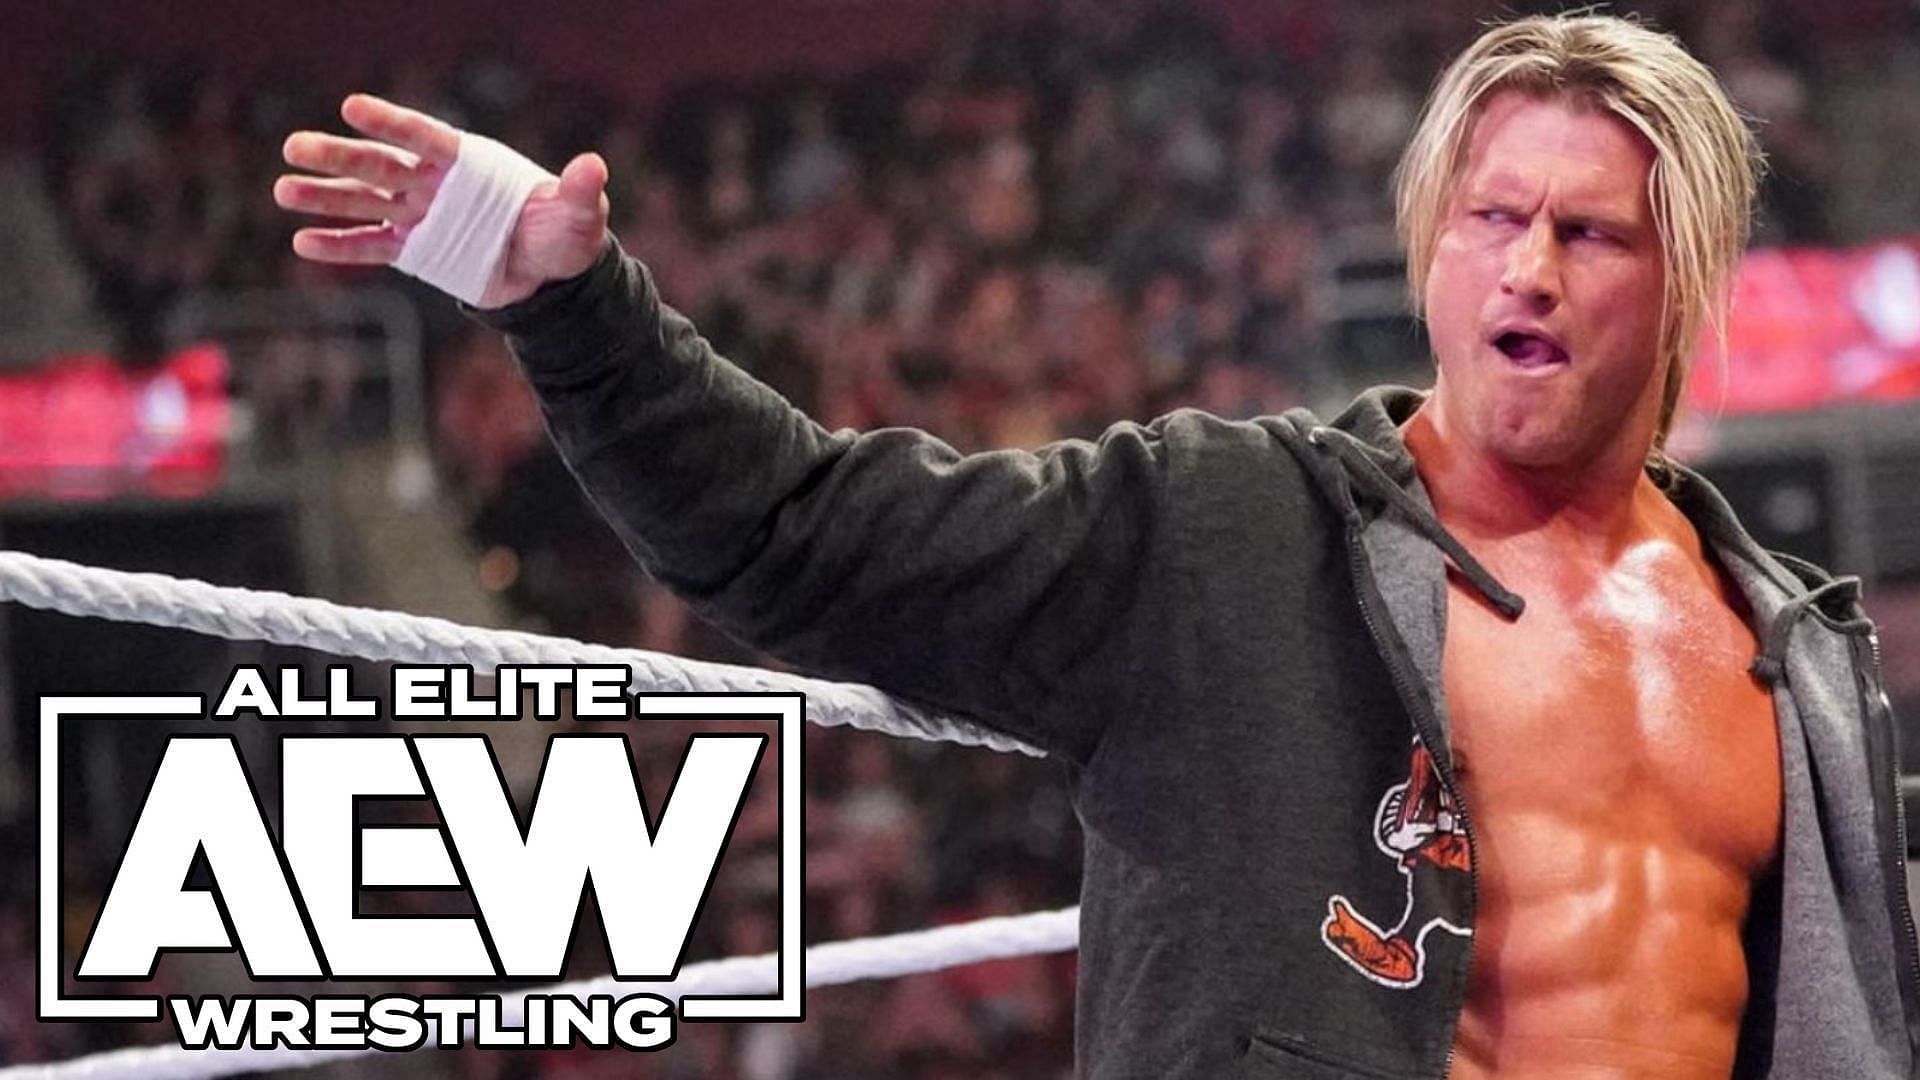 Dolph Ziggler receives a cheeky birthday wish from AEW star